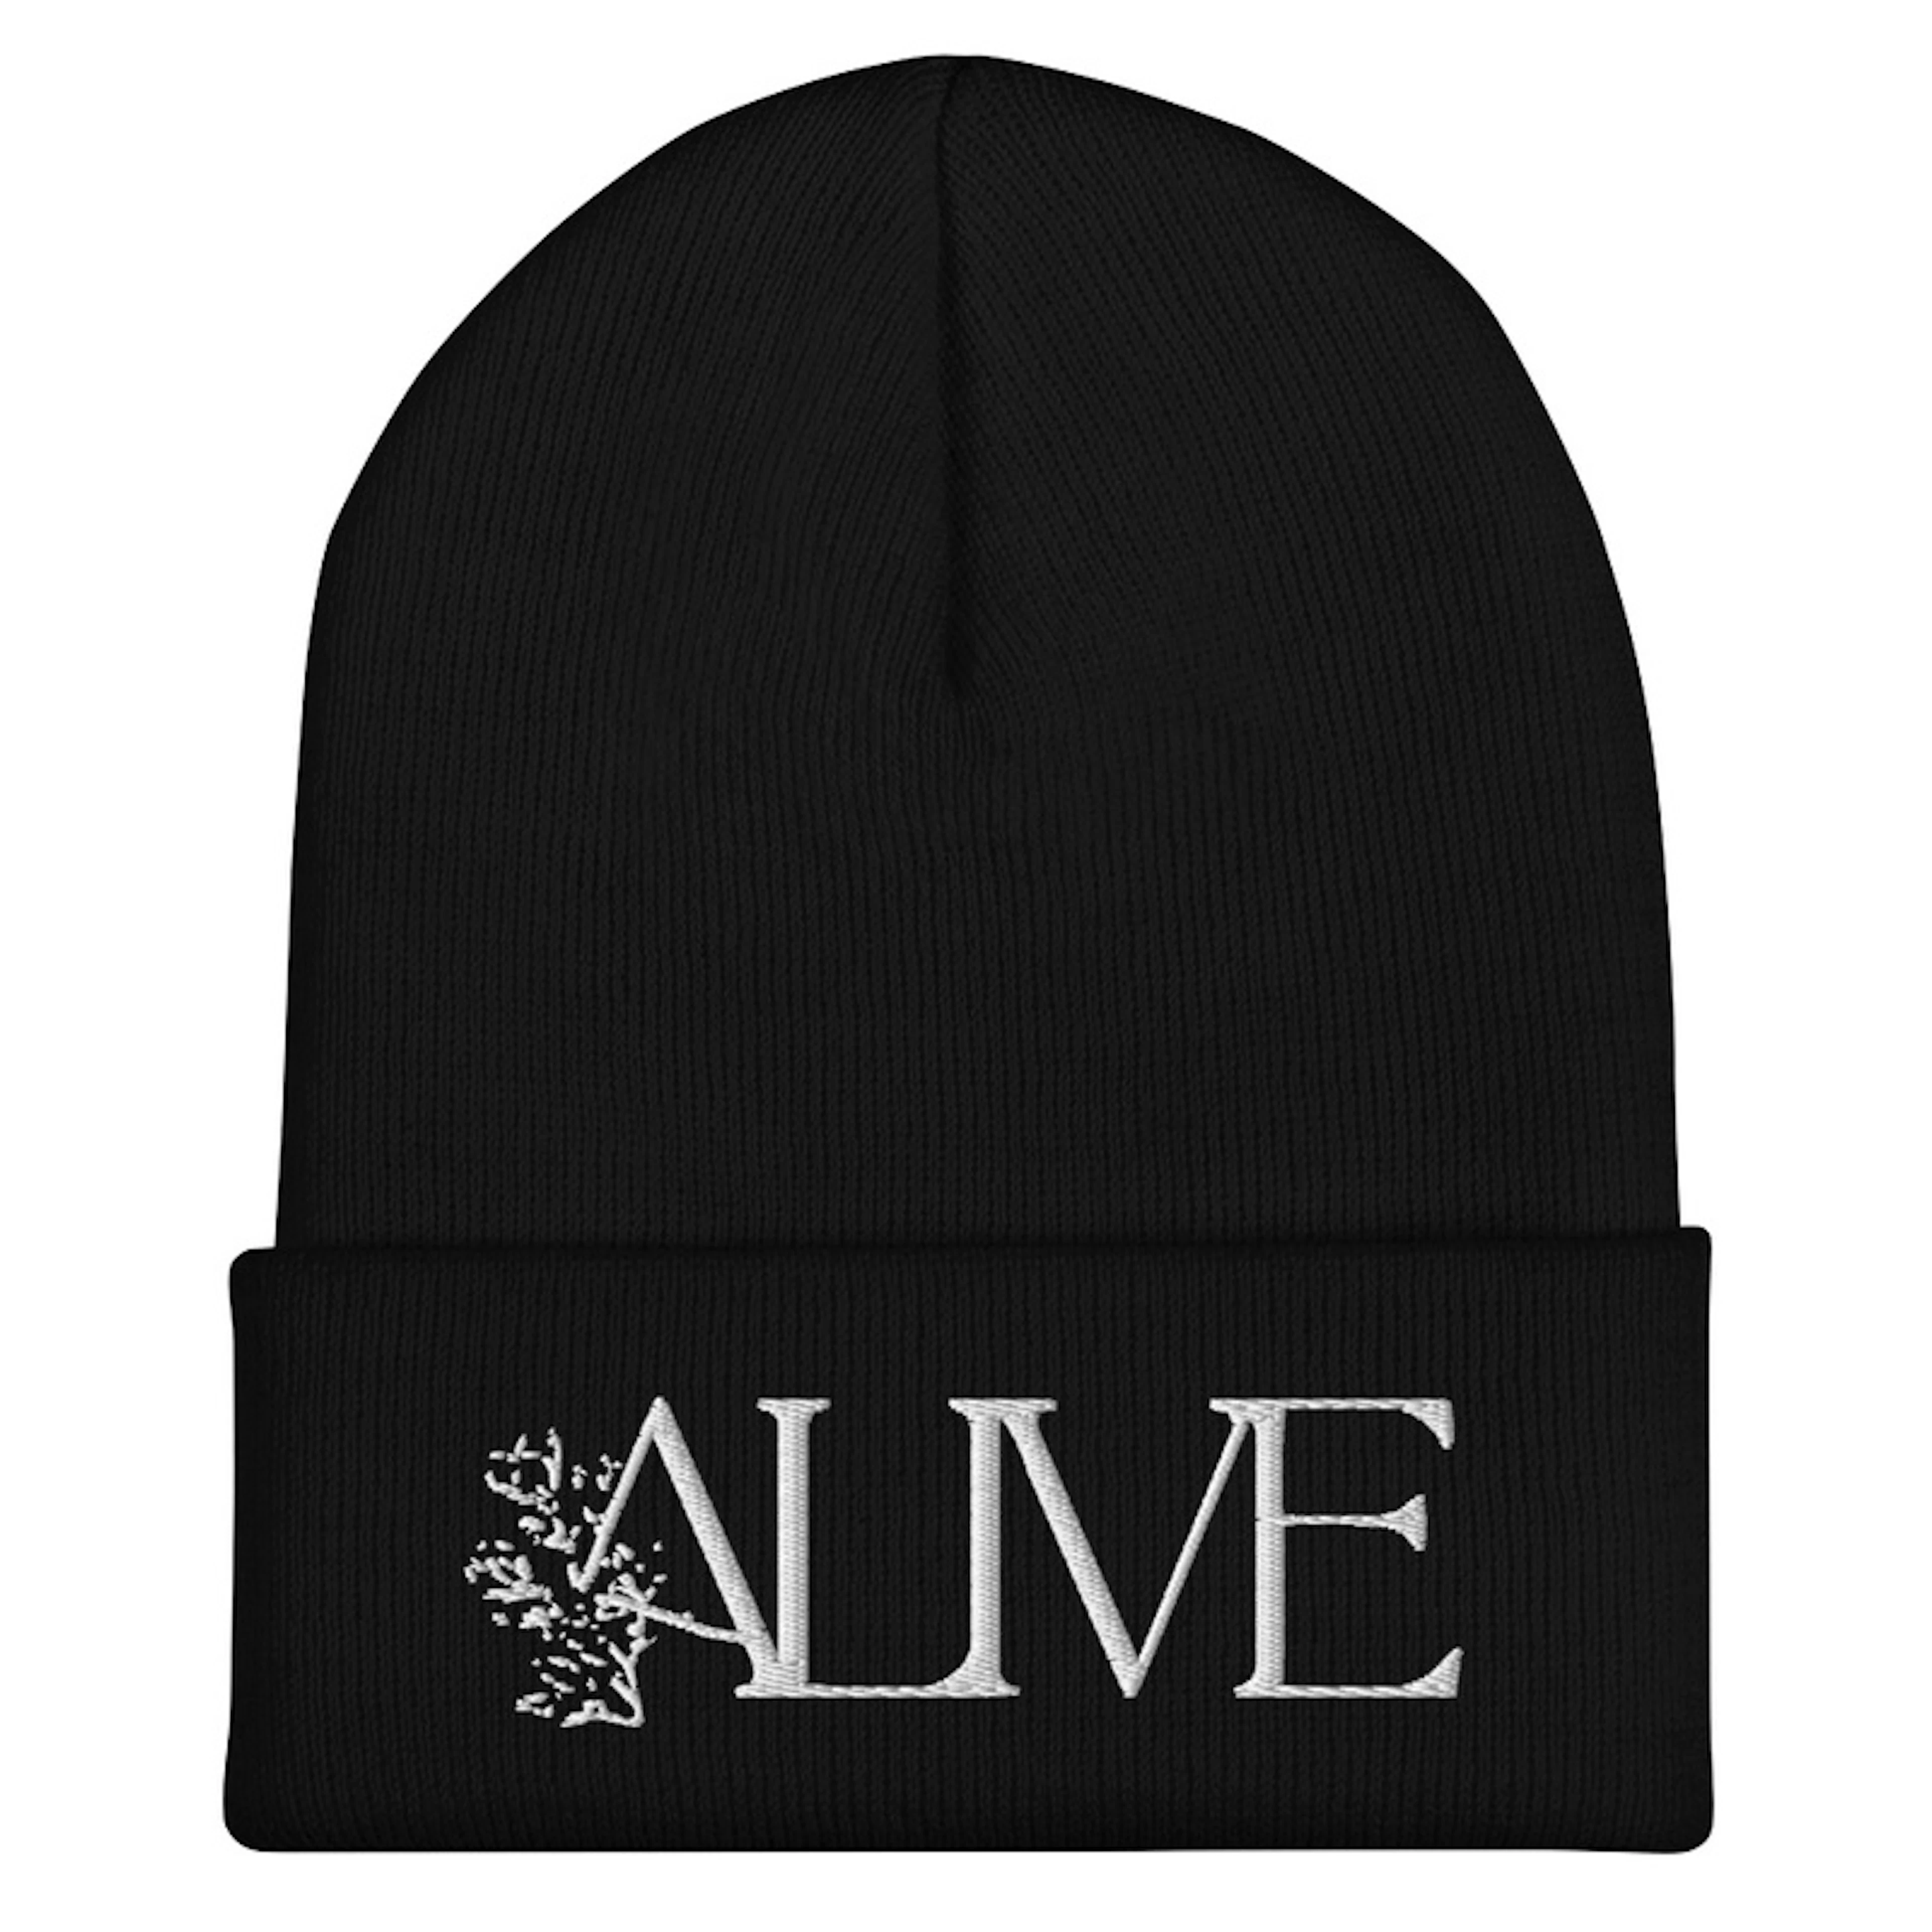 Alive Embroidered Beanie